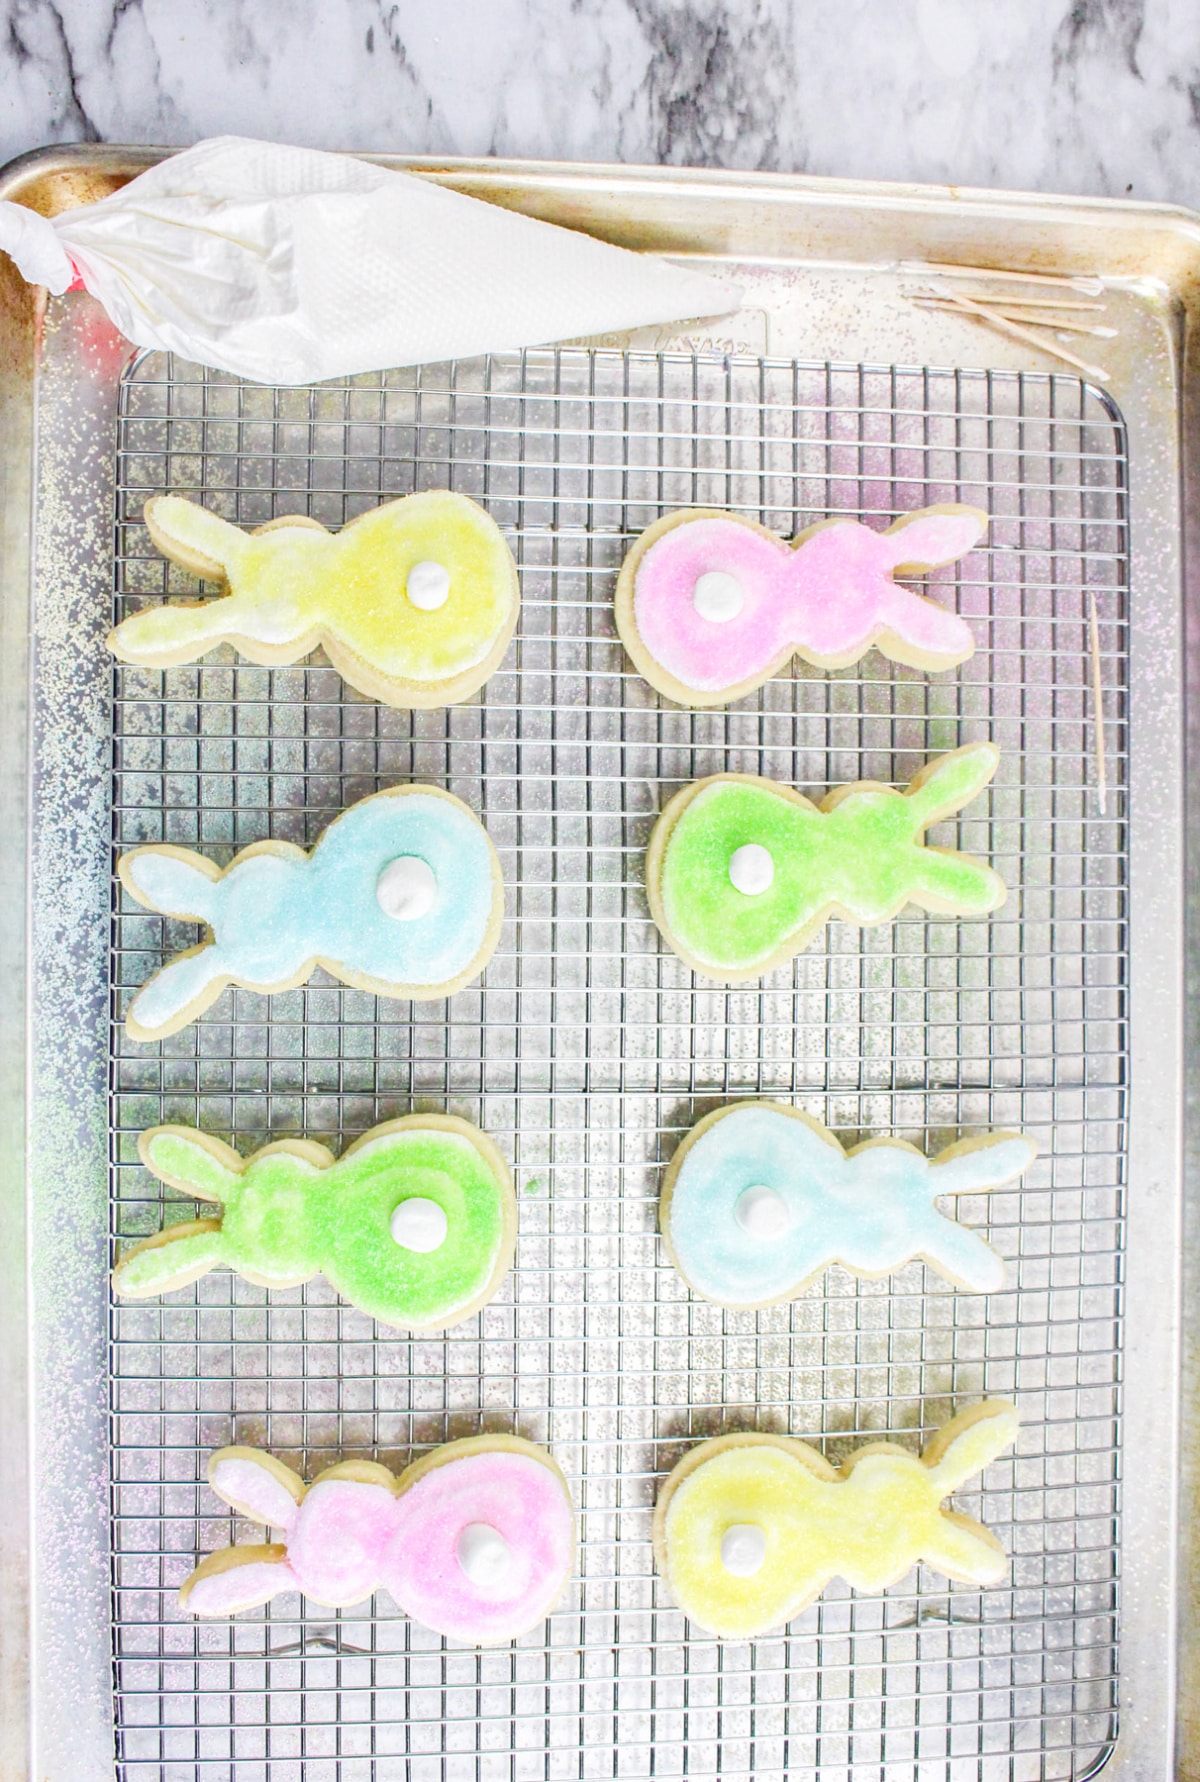 Bunny tail cookies with icing and sprinkles